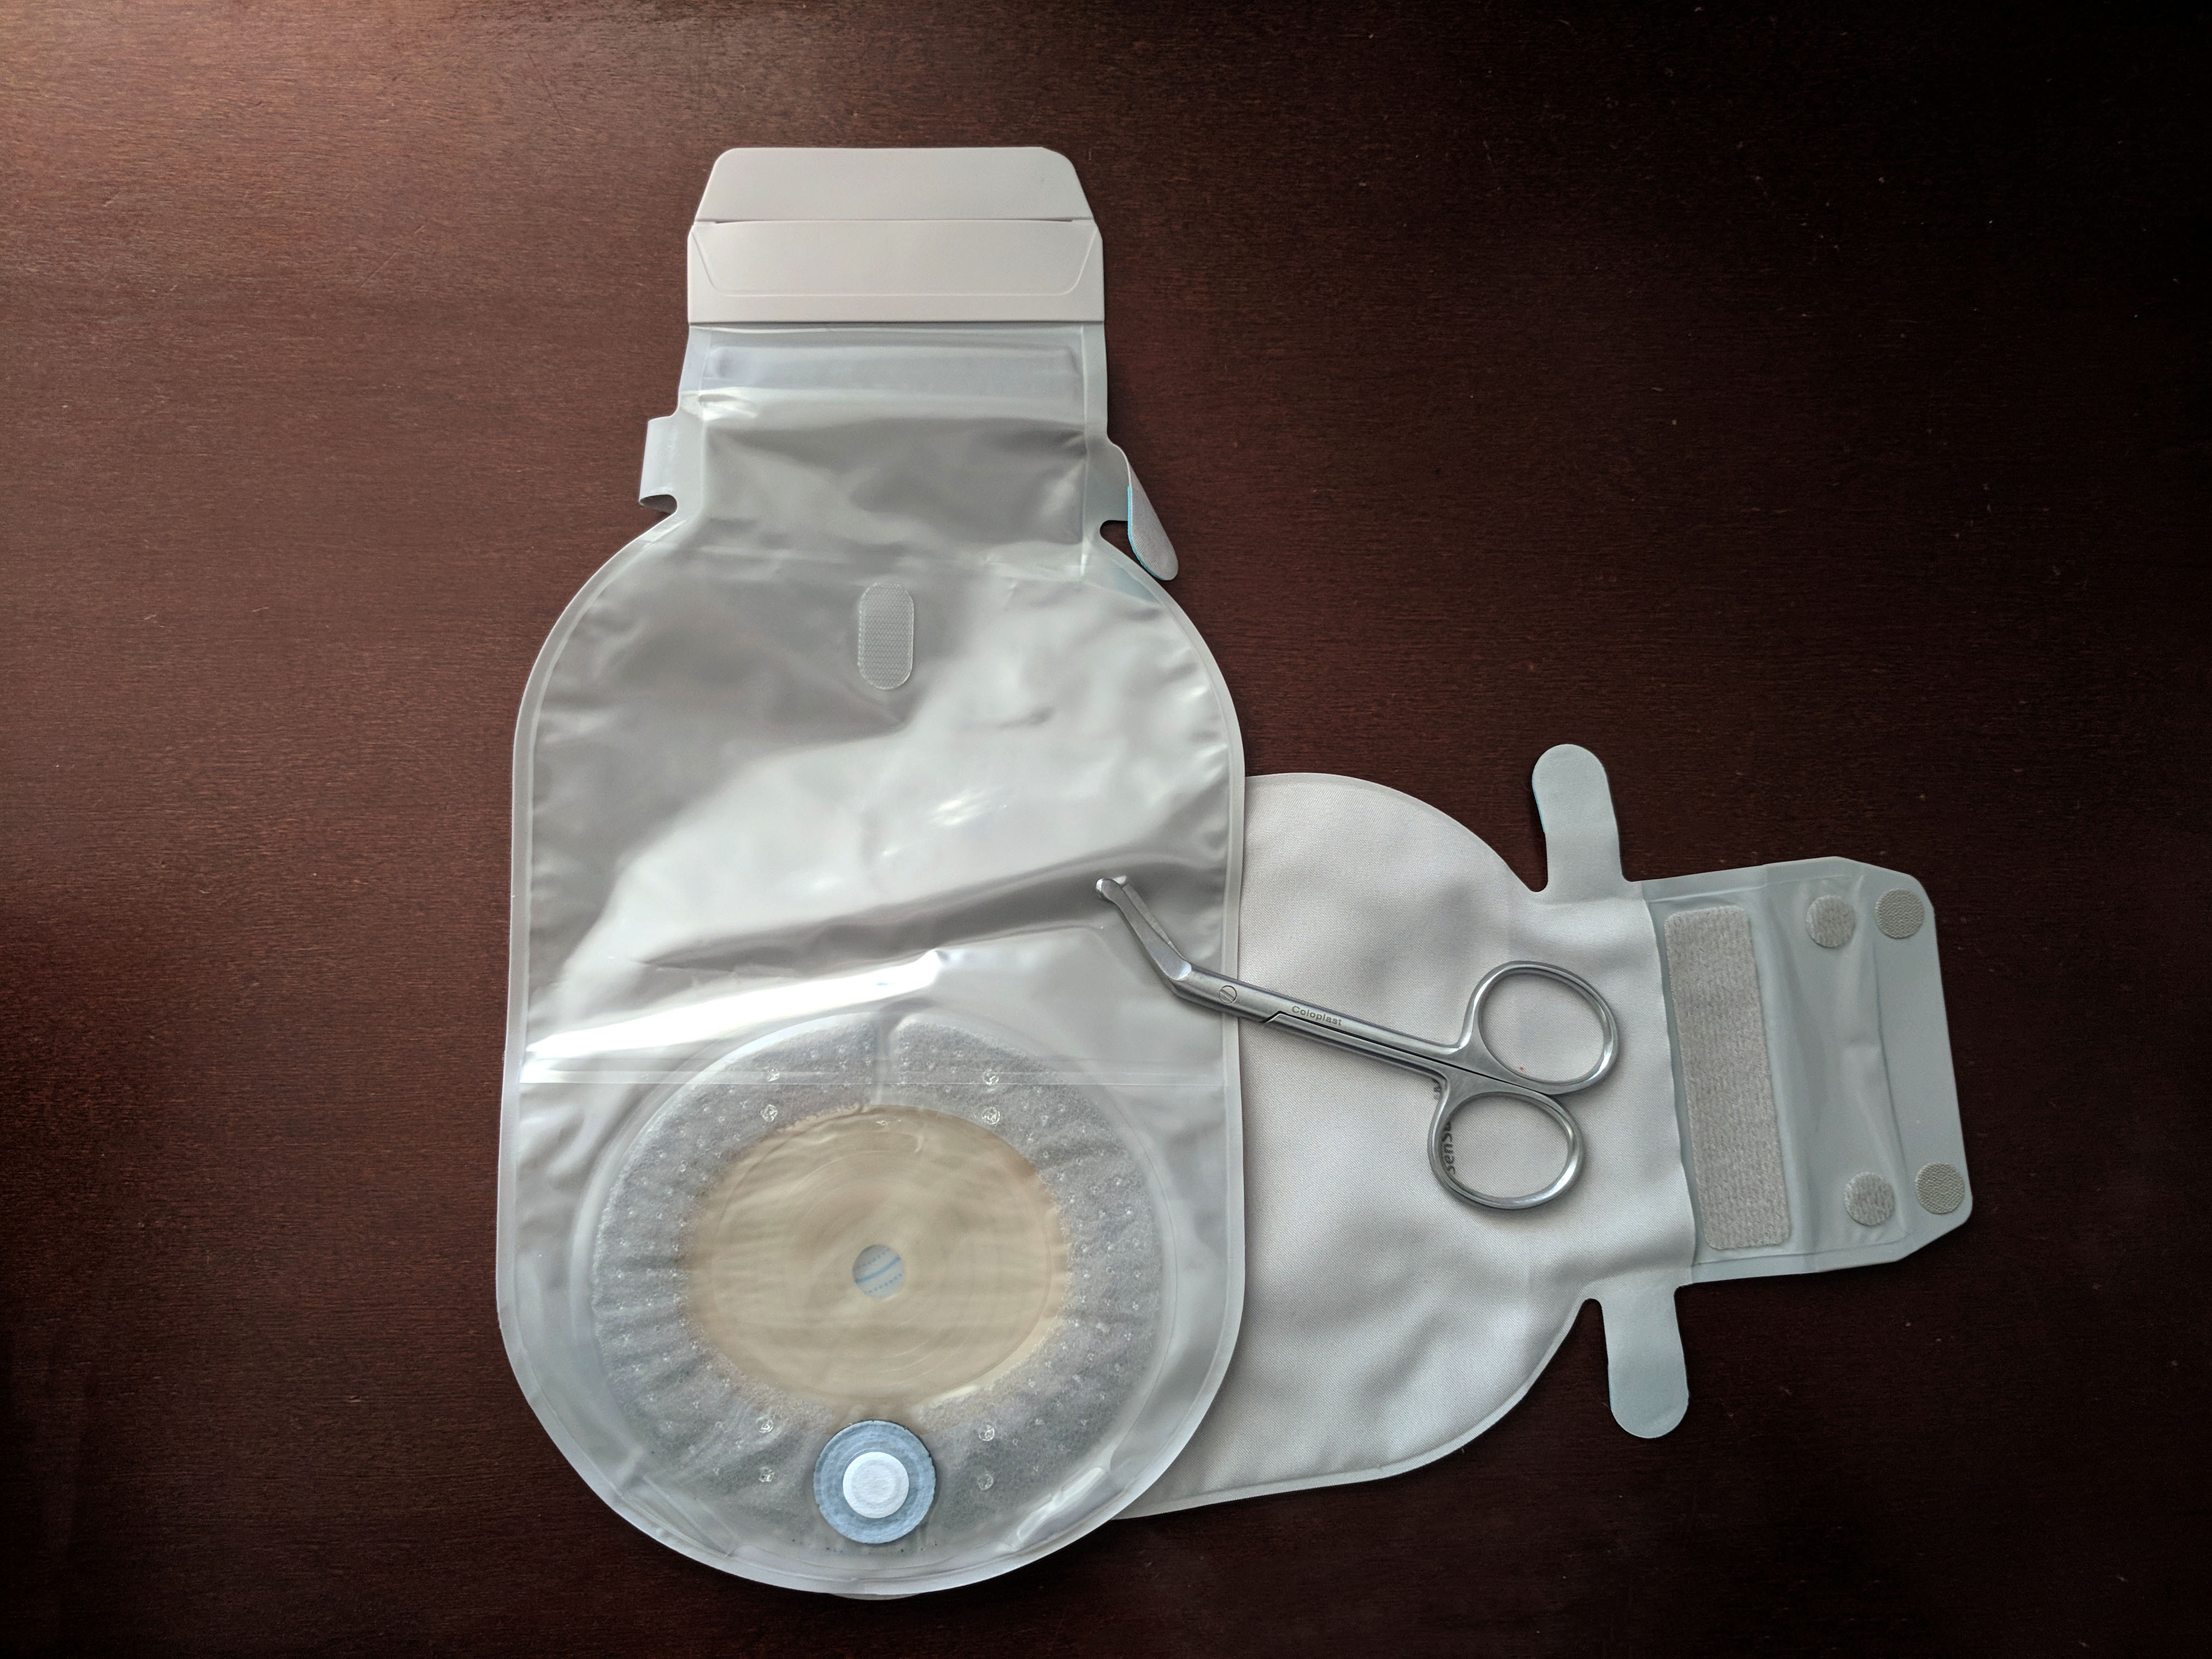 How to Change Your Ostomy Pouch - United Ostomy Associations of America